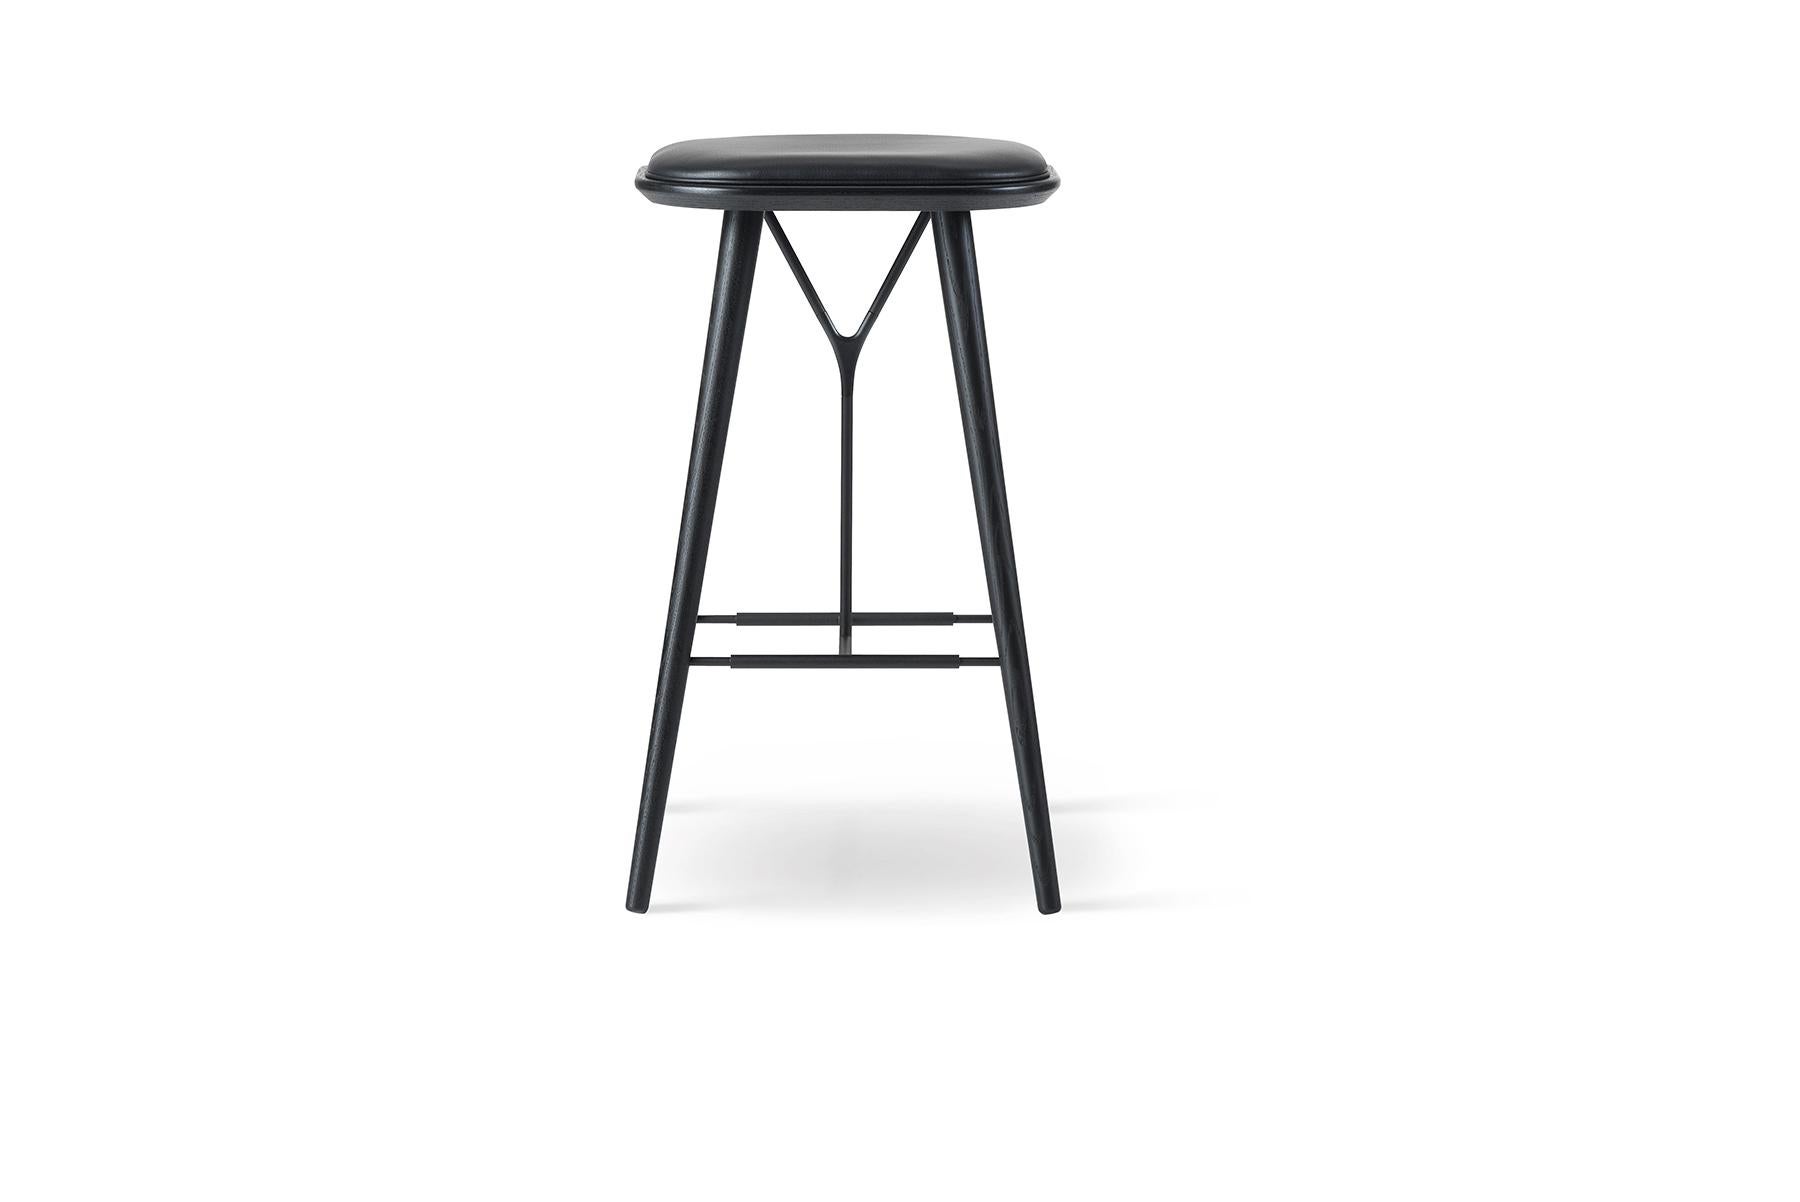 Space copenhagen spine stool (backless) In 2014, Space Copenhagen built onto the Spine series with the backless barstool Spine Stool. The stool is available in both bar and kitchen counter heights.